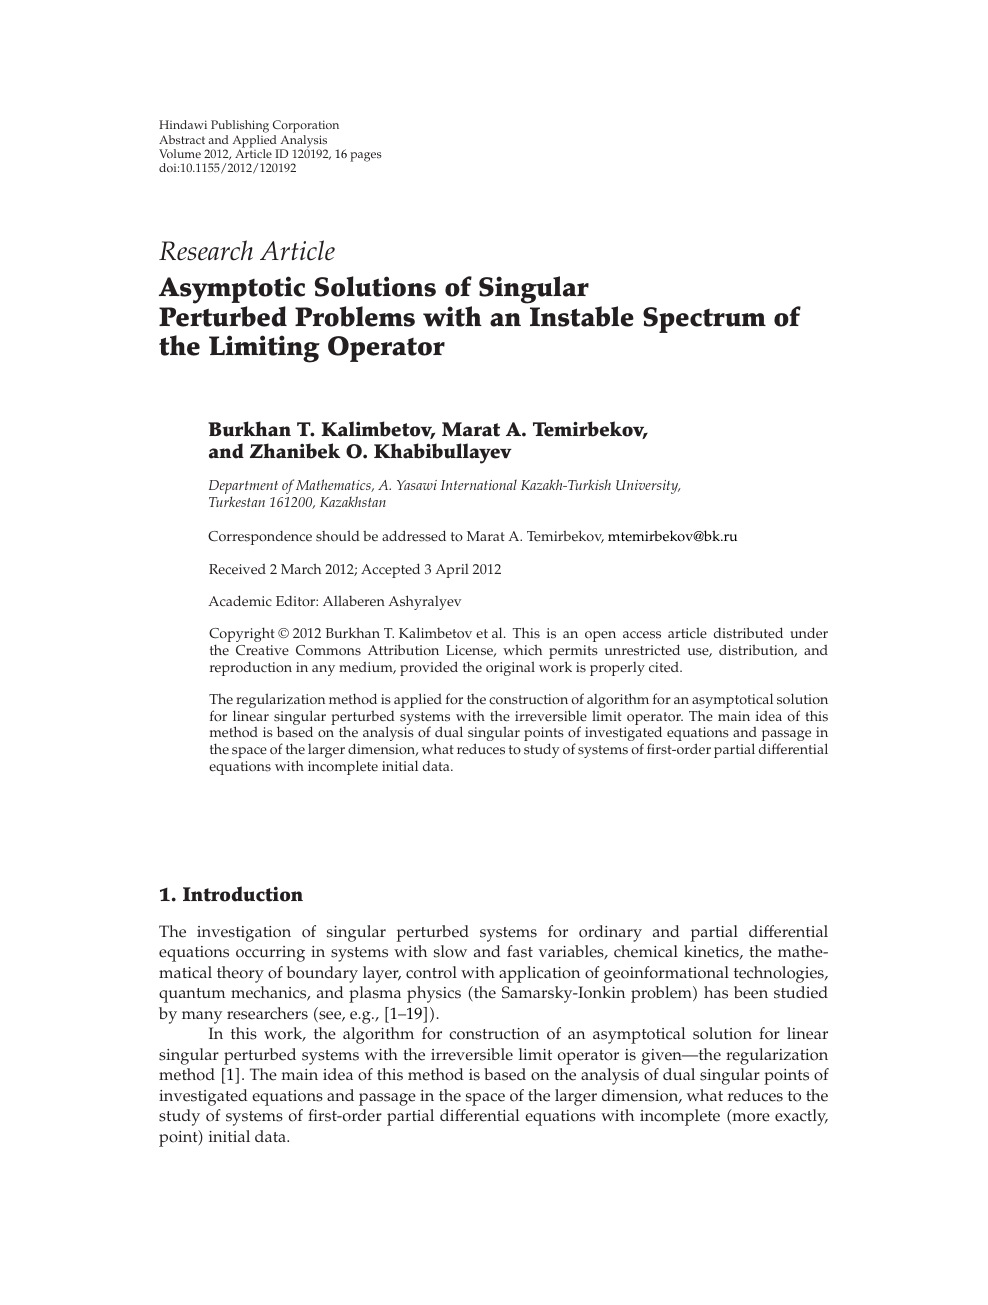 Asymptotic Solutions Of Singular Perturbed Problems With An Instable Spectrum Of The Limiting Operator Topic Of Research Paper In Mathematics Download Scholarly Article Pdf And Read For Free On Cyberleninka Open